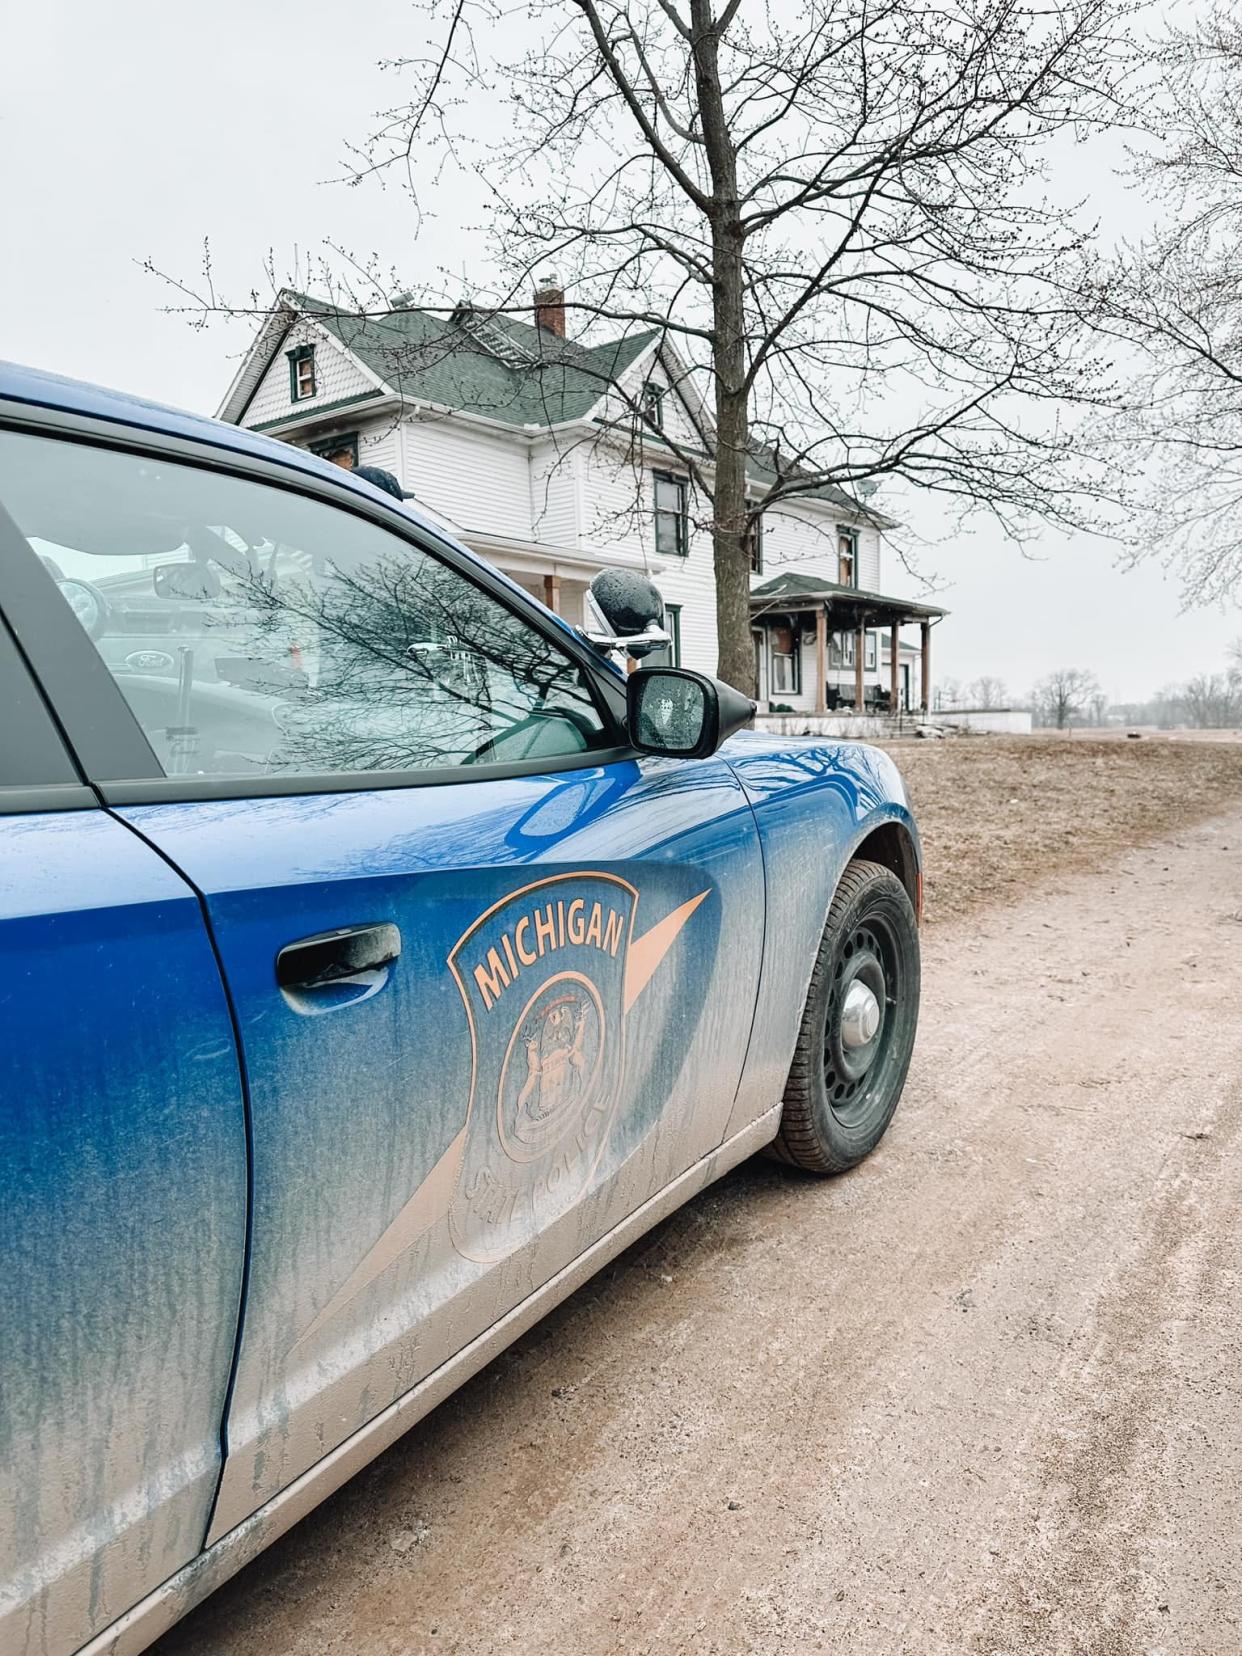 Michigan State Police are investigating a break in at a Deerfield Township home recently destroyed in a fire, which was discovered Wednesday, March 29, 2023.